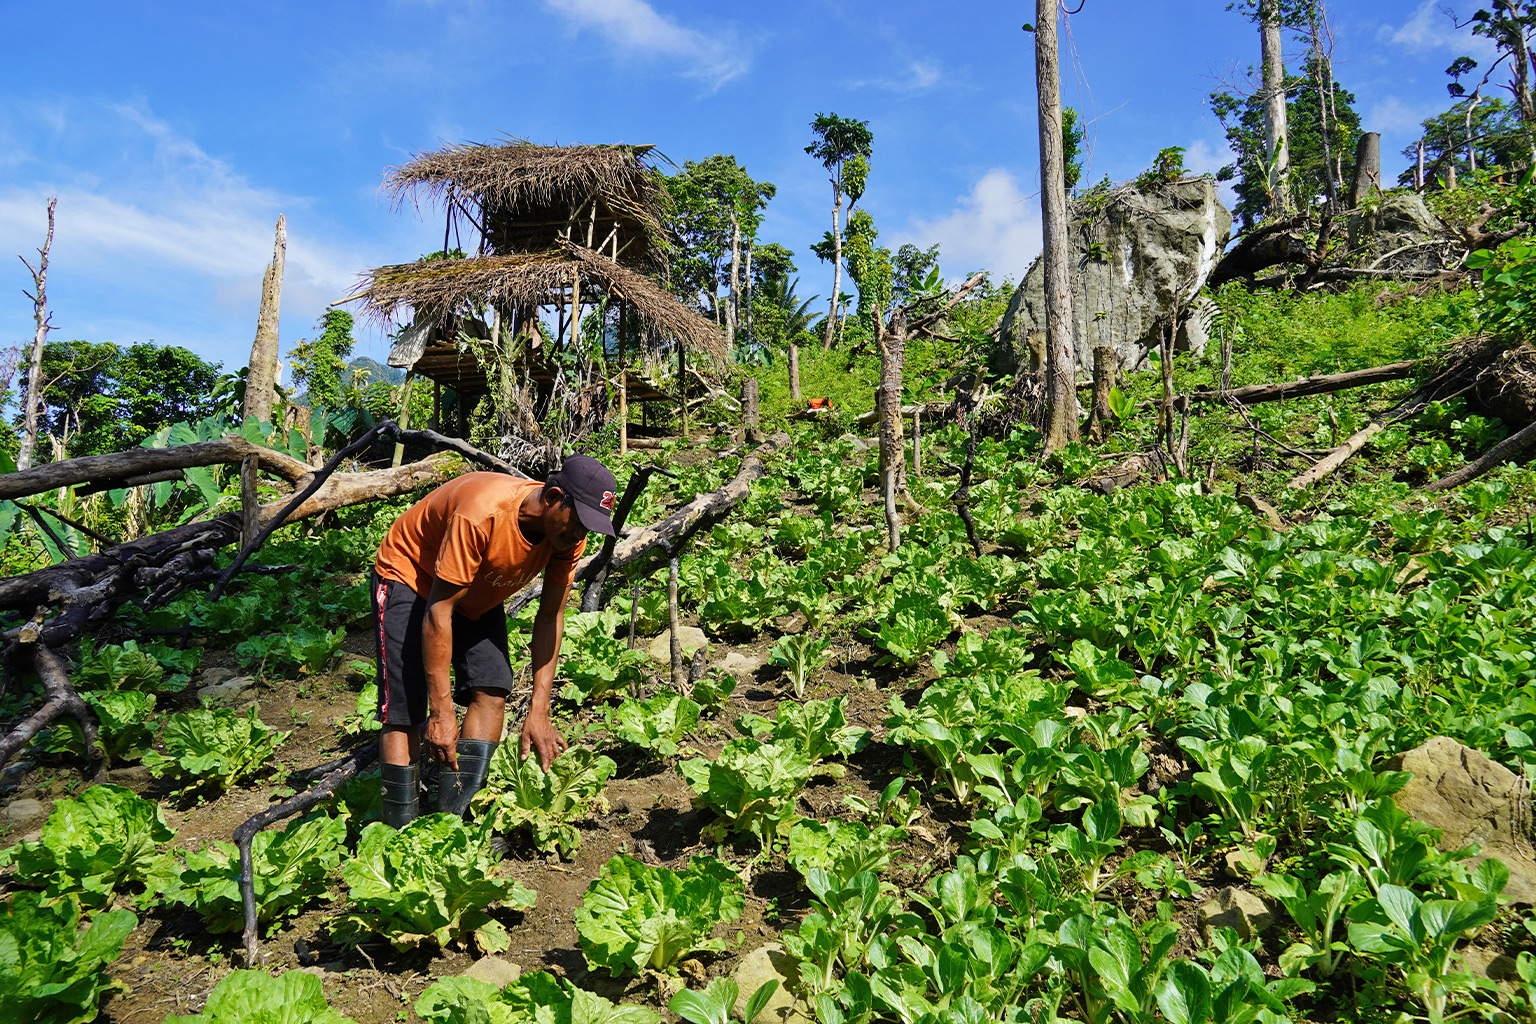 Eke Lastama, a Pala'wan leader, monitors the growth of organic cabbage in a swidden farm within the Mantalingahan range, selling the highland vegetable in the lowland market upon harvest.